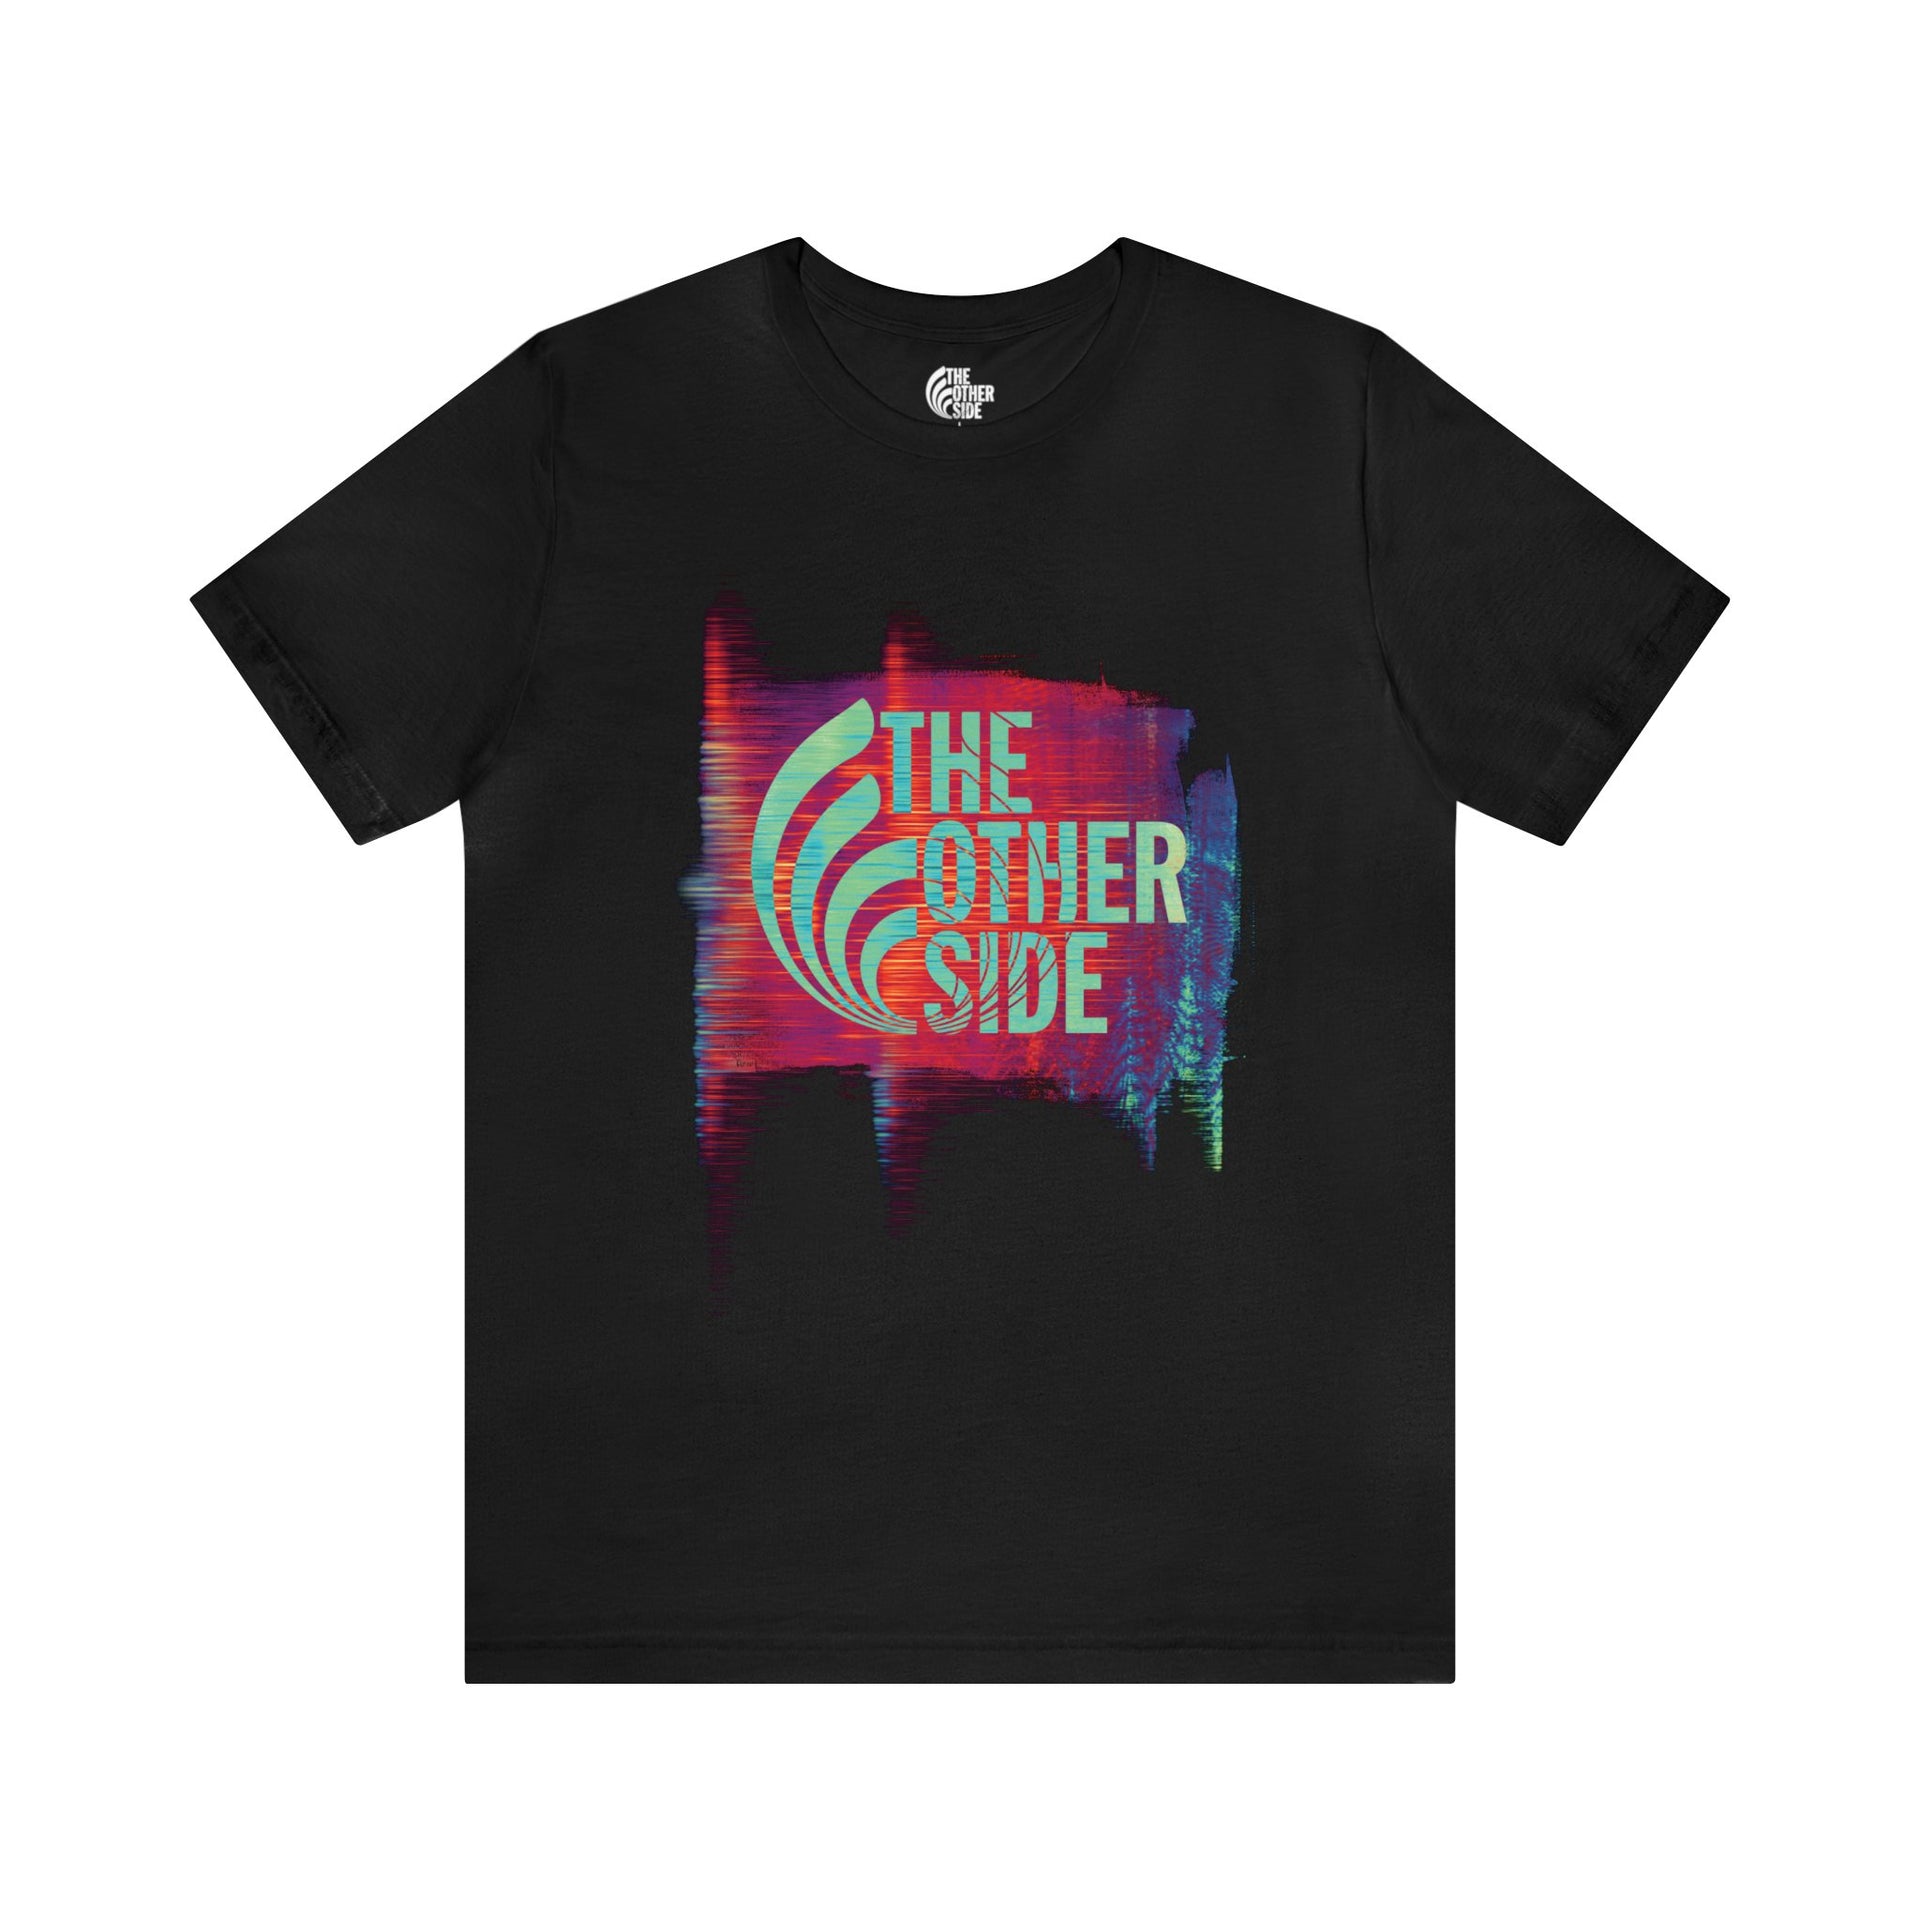 Unlock The Other Side - Tee